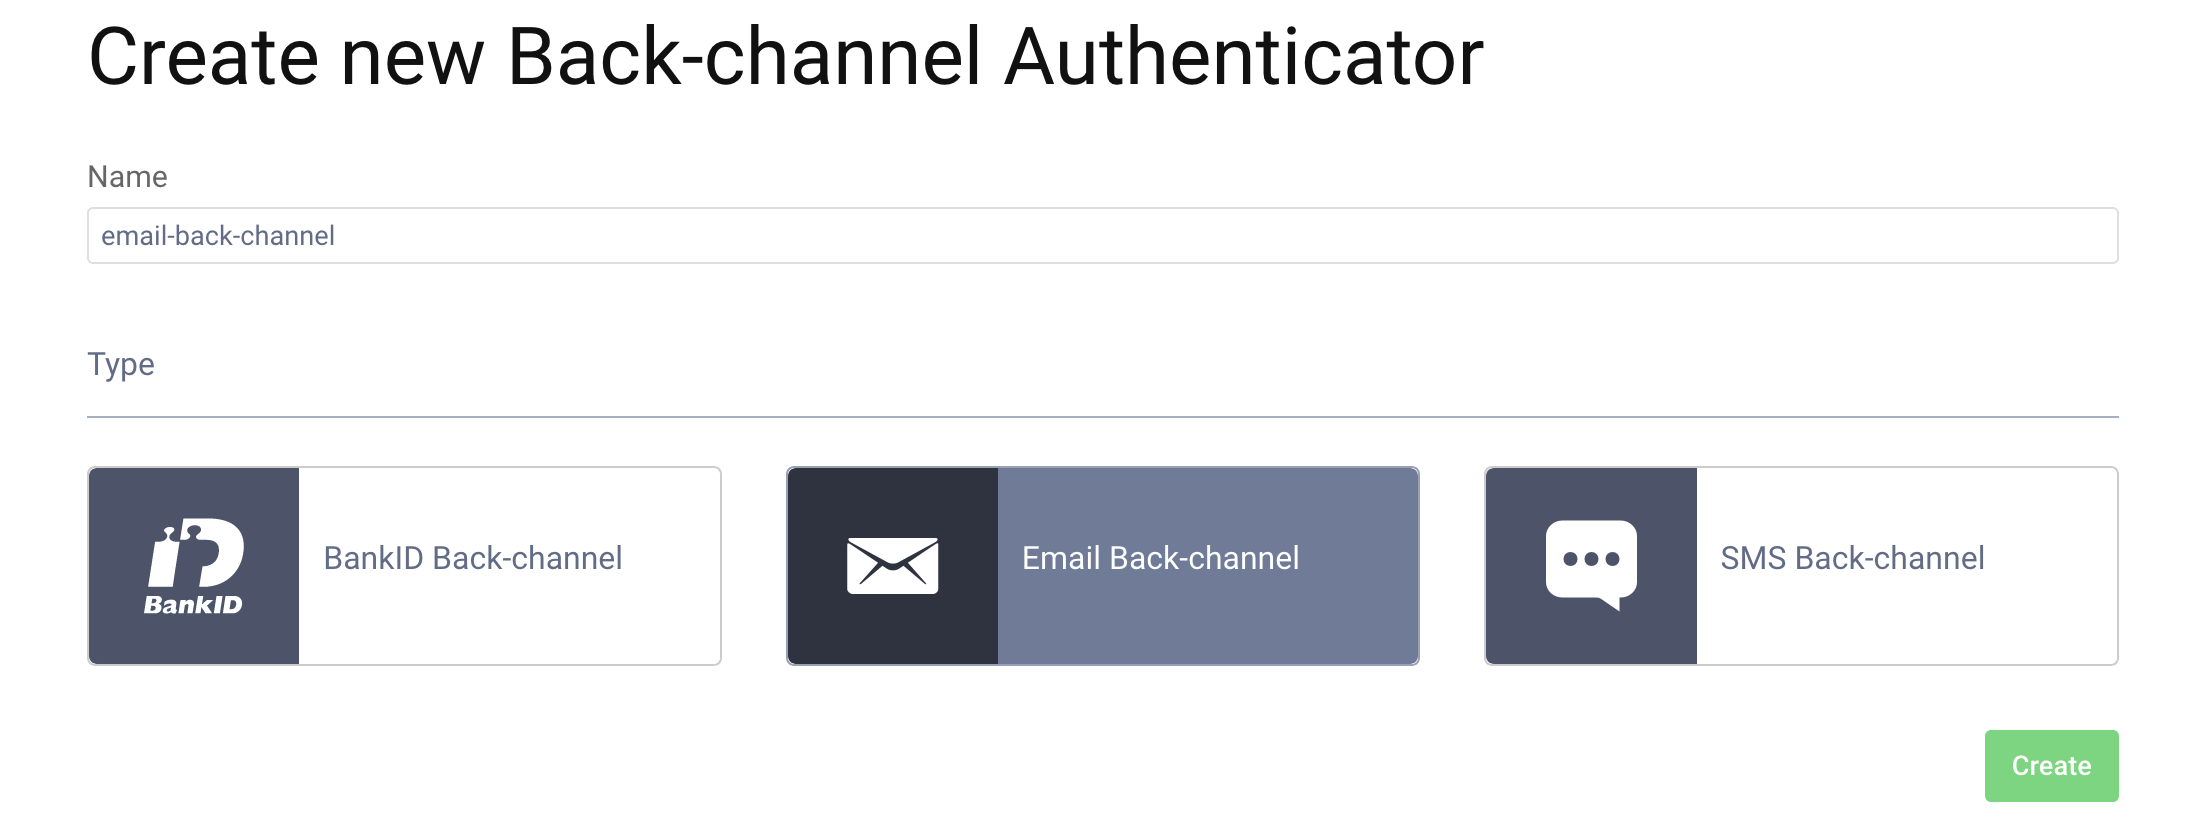 Create a back-channel authenticator